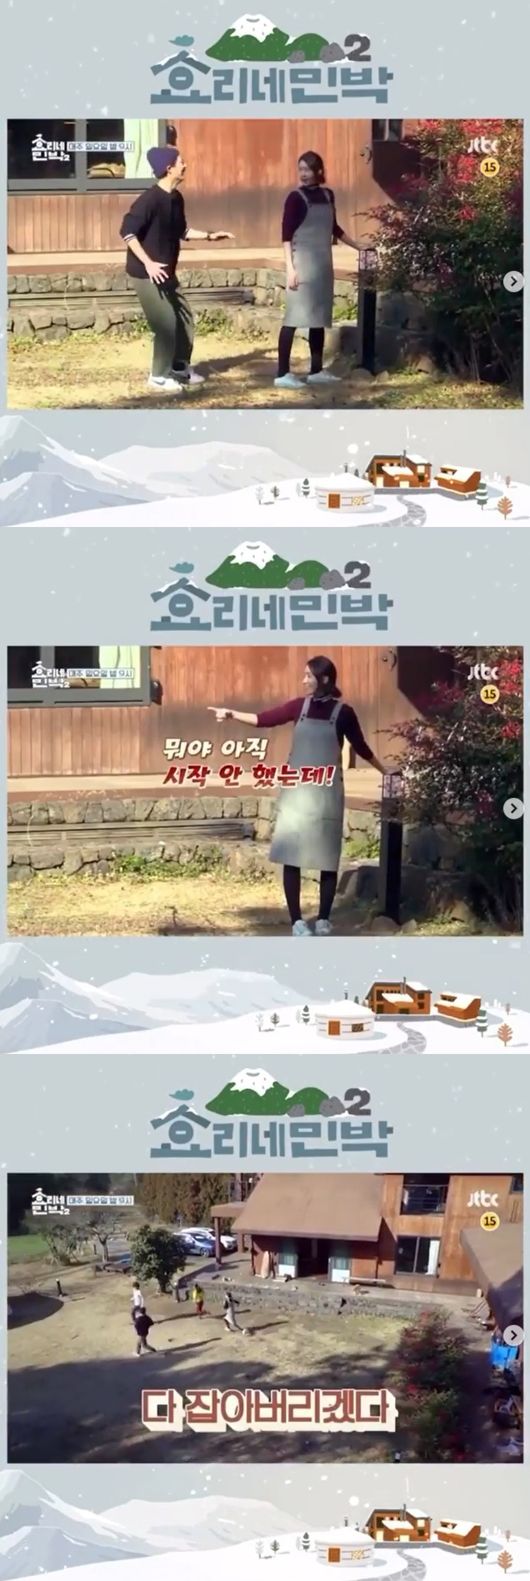 Girls Generation Im Yoon-ah misses Park Bo-gum, Lee Hyori and Lee Sang-soonOn the afternoon of the 23rd, Girls Generation Im Yoon-ah posted a JTBC House of Hyori 2 video on his personal SNS, saying, I remember # Jeju # memory at this time of year.In the video, Im Yoon-ah is having a relaxing day playing badminton and hide-and-seek games with Park Bo-gum, Lee Sang-soon and Lee Hyori in the yard of the Guest House in Sogili, Jeju Island.In particular, Lee Hyori hugged Im Yoon-ah and said, I do not think I can live without you.The fans are showing their expectations for the production of Hyoris Guest house season 3, leaving comments such as I want to see you again, Please come out again, I miss you so beautiful and so much.Meanwhile, Im Yoon-ah appeared as a part-time student on JTBC Hyoriene Guest House 2 which ended in May 2018.Girls Generation Im Yoon-ah SNS